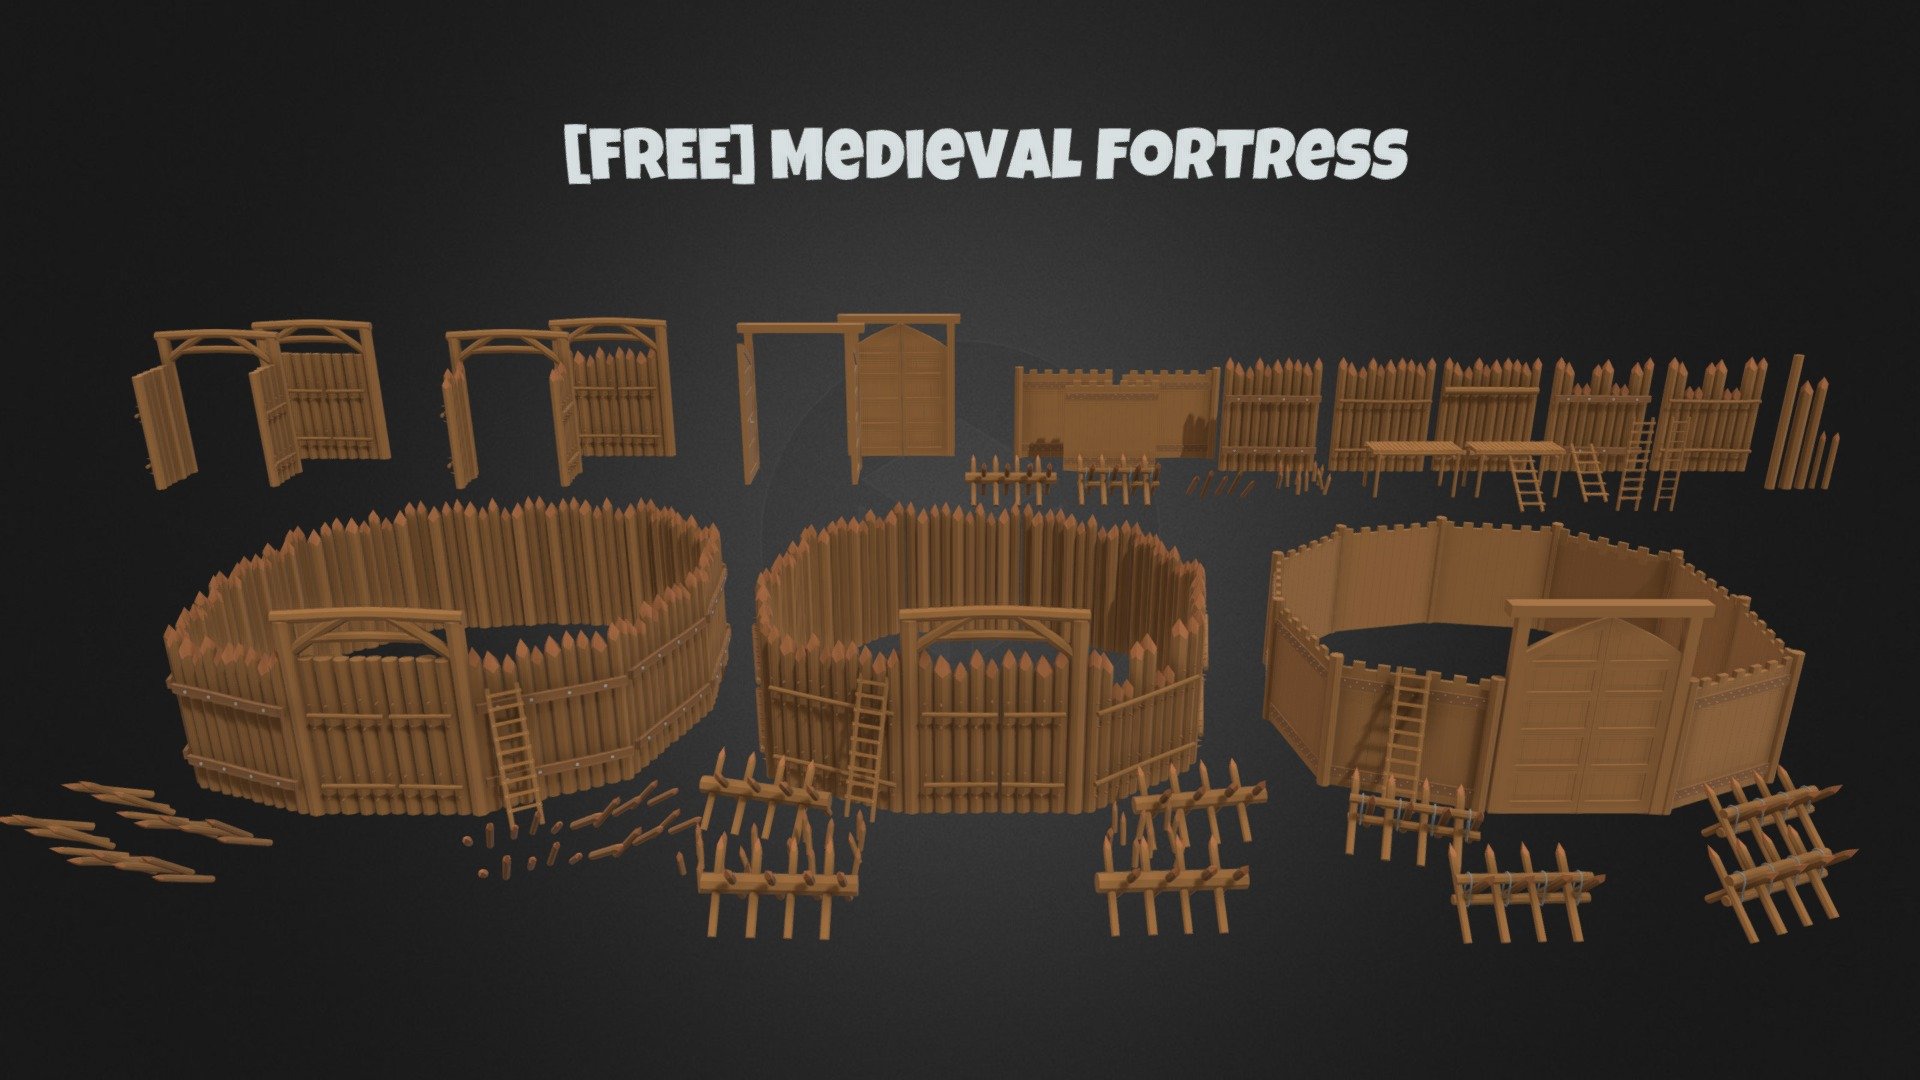 Medieval Fortress for level design or just for learning enjoy!

My Youtube Channel - https://www.youtube.com/@3DArt4Games

SimplePolygon Discord - https://discord.gg/8WSpWnGH4b

[Contents]

Total Models x28, Unique Models x28, x4 defensive spikes, x6 palisade walls, x3 unique gates open/closed, x4 wooden spikes to use for your own, x2 ladders, x1 platform, x1 platform with ladder attatched,   [ enjoy ] !

[Colours]

light wood, medium wood, dark wood, iron

Original Models / Lowpoly Models / Game ready Props

[Licence] Not to resell model, can sell commercially in end project/game

Credit myself, SimplePolygon

If you have any further questions I will be happy to answer 3d model